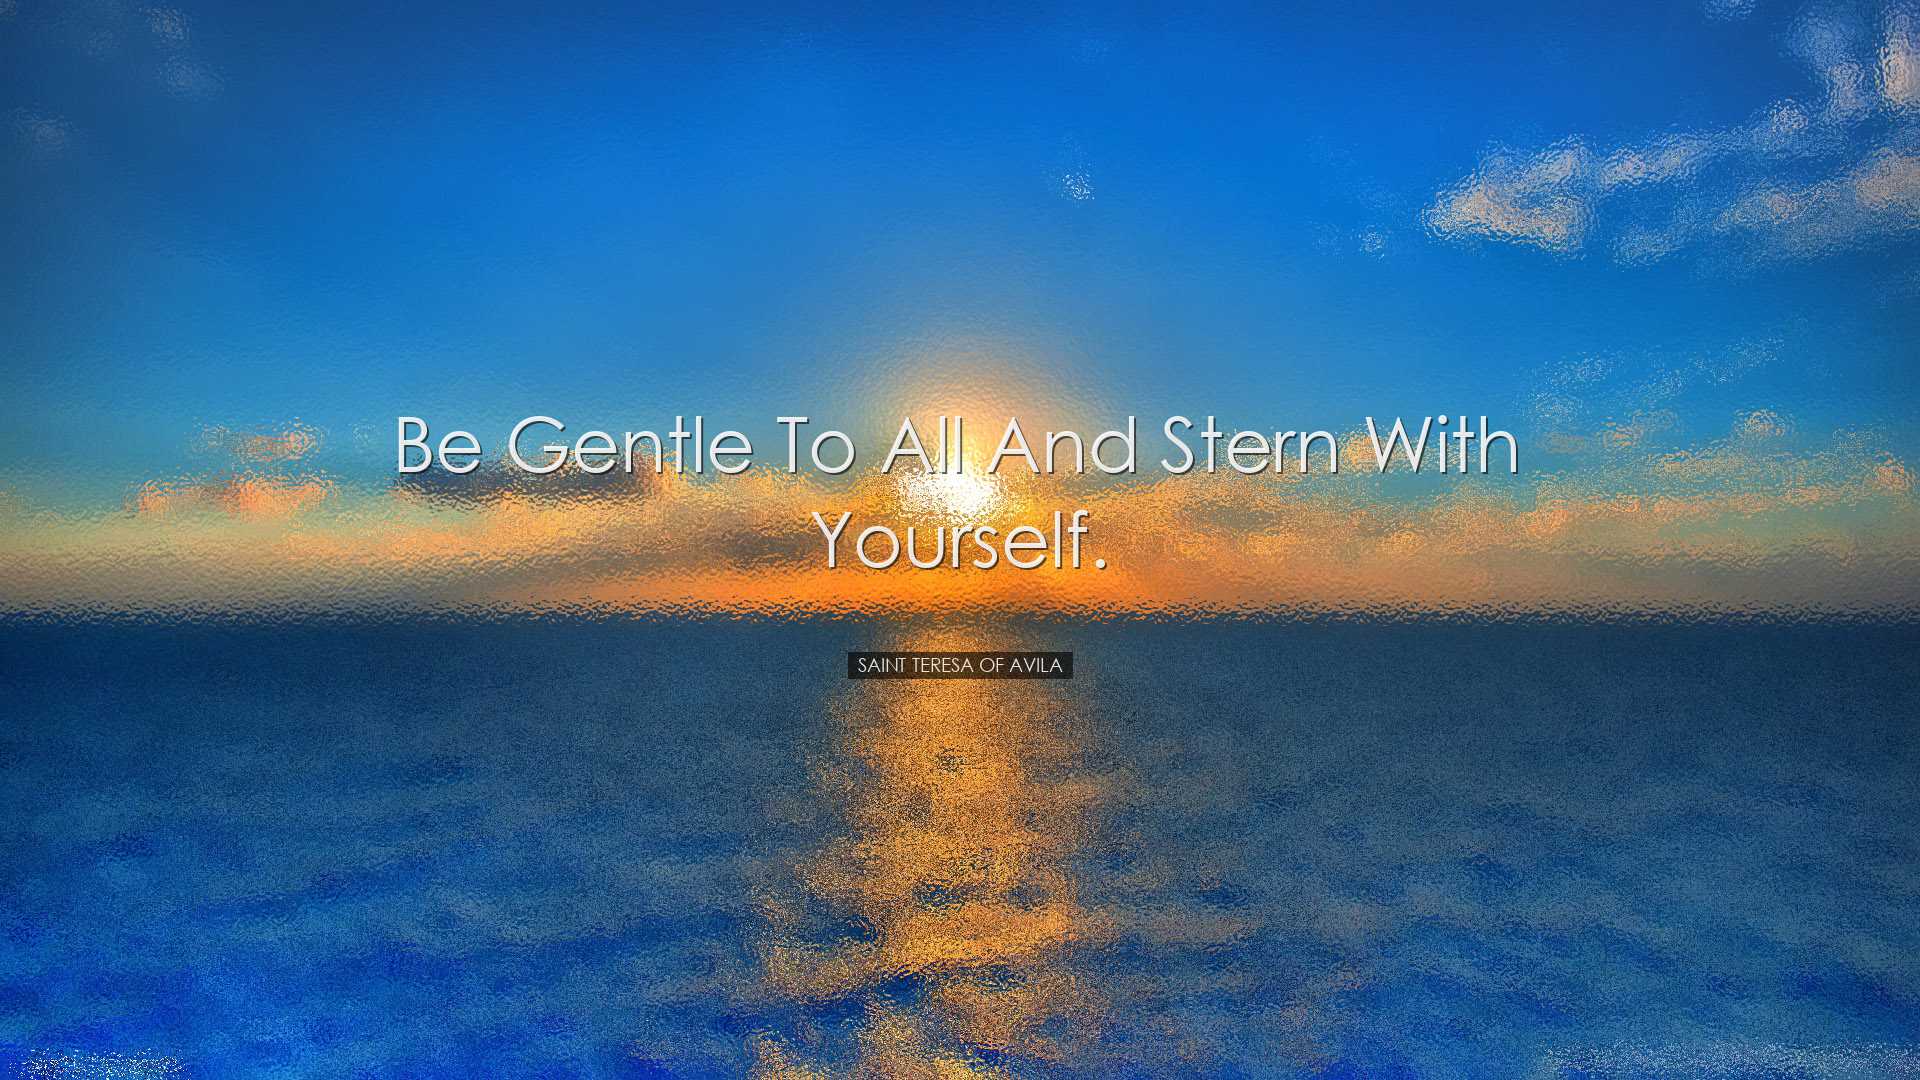 Be gentle to all and stern with yourself. - Saint Teresa of Avila